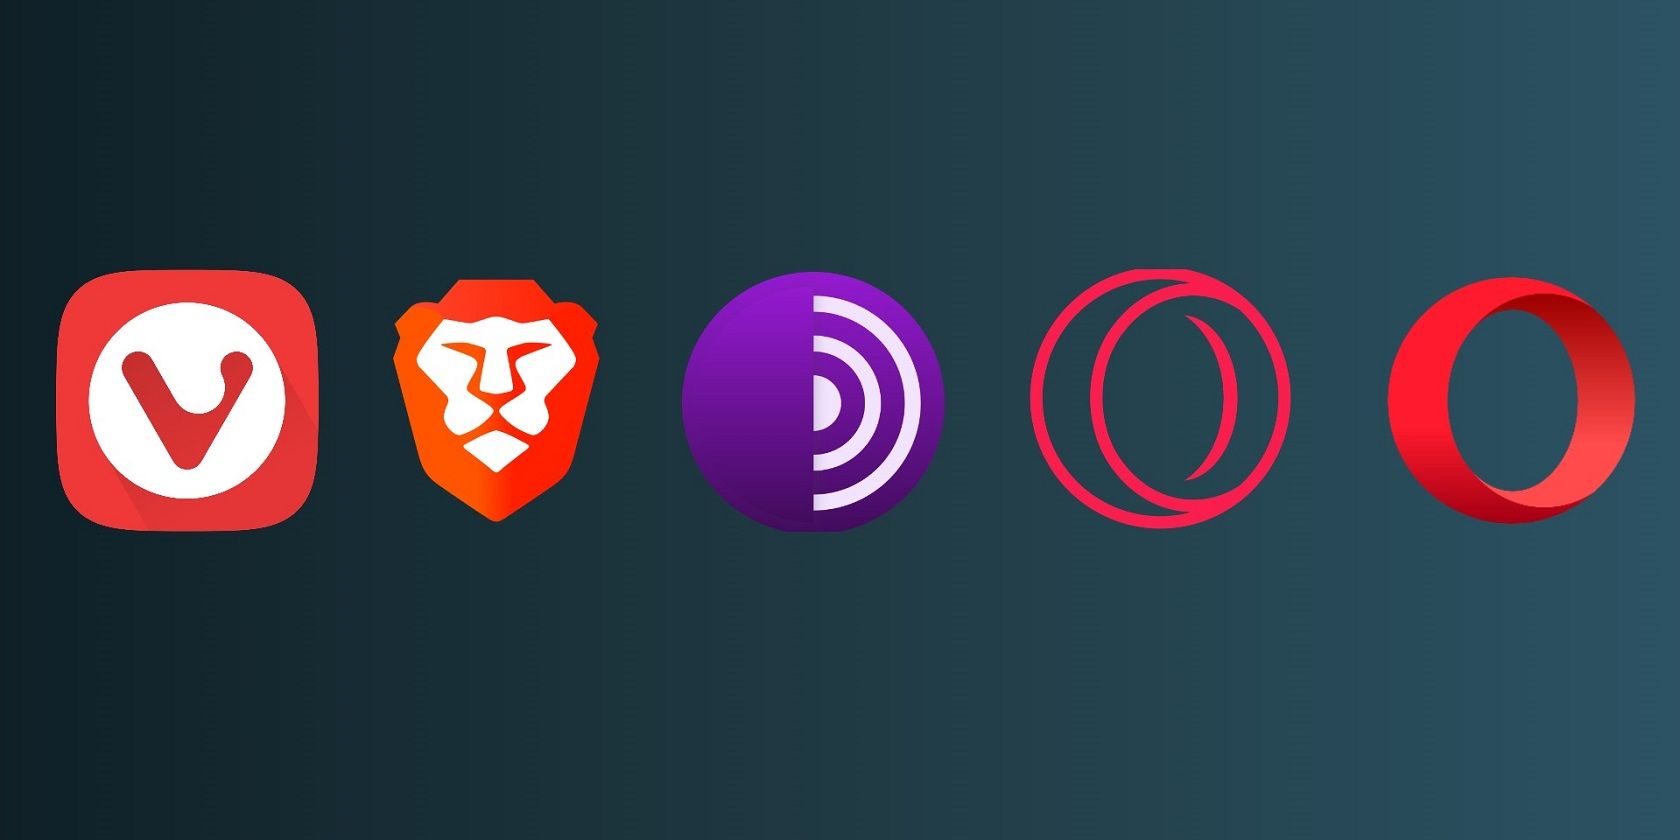 Icons of Vivaldi, Brave, Tor, Opera GX and Opera Browsers